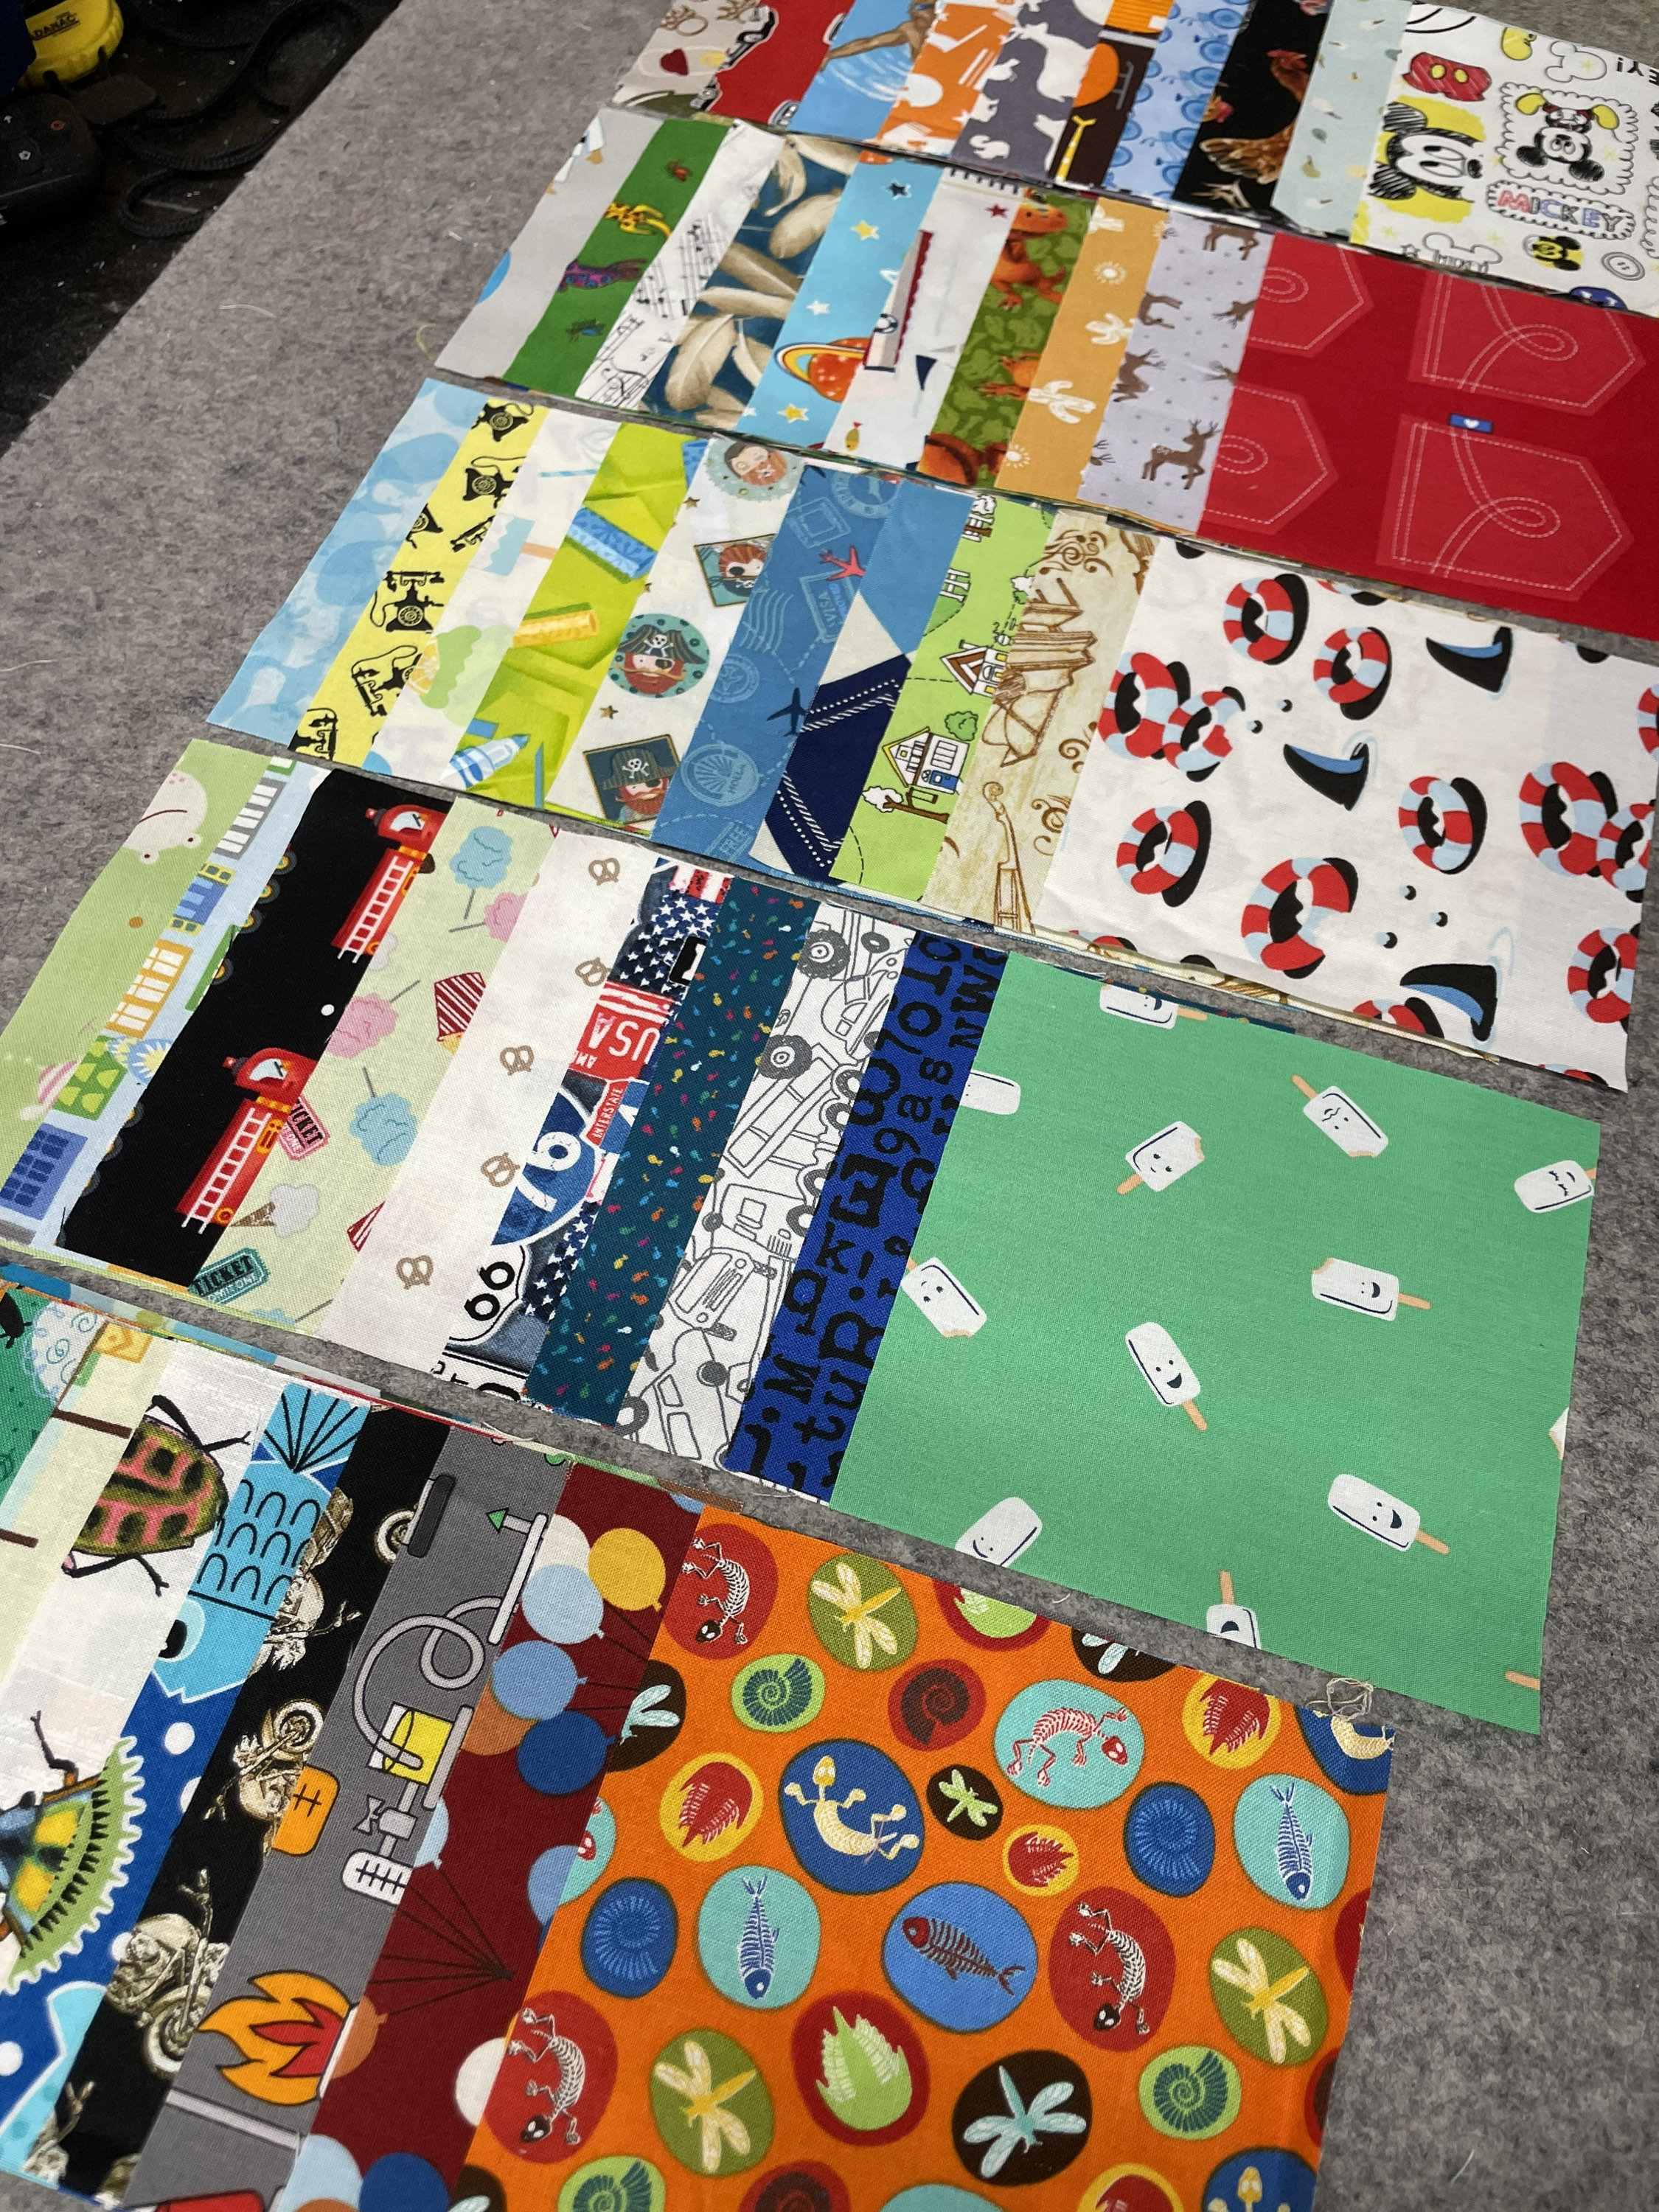 I Spy Pre-cut Quilt Squares, 5 Inch, 50 Prints, Charm Pack, Great for Ispy,  Novelty Fabric, Boy, Gender Neutral, Kids, Ready to Sew Lot J 